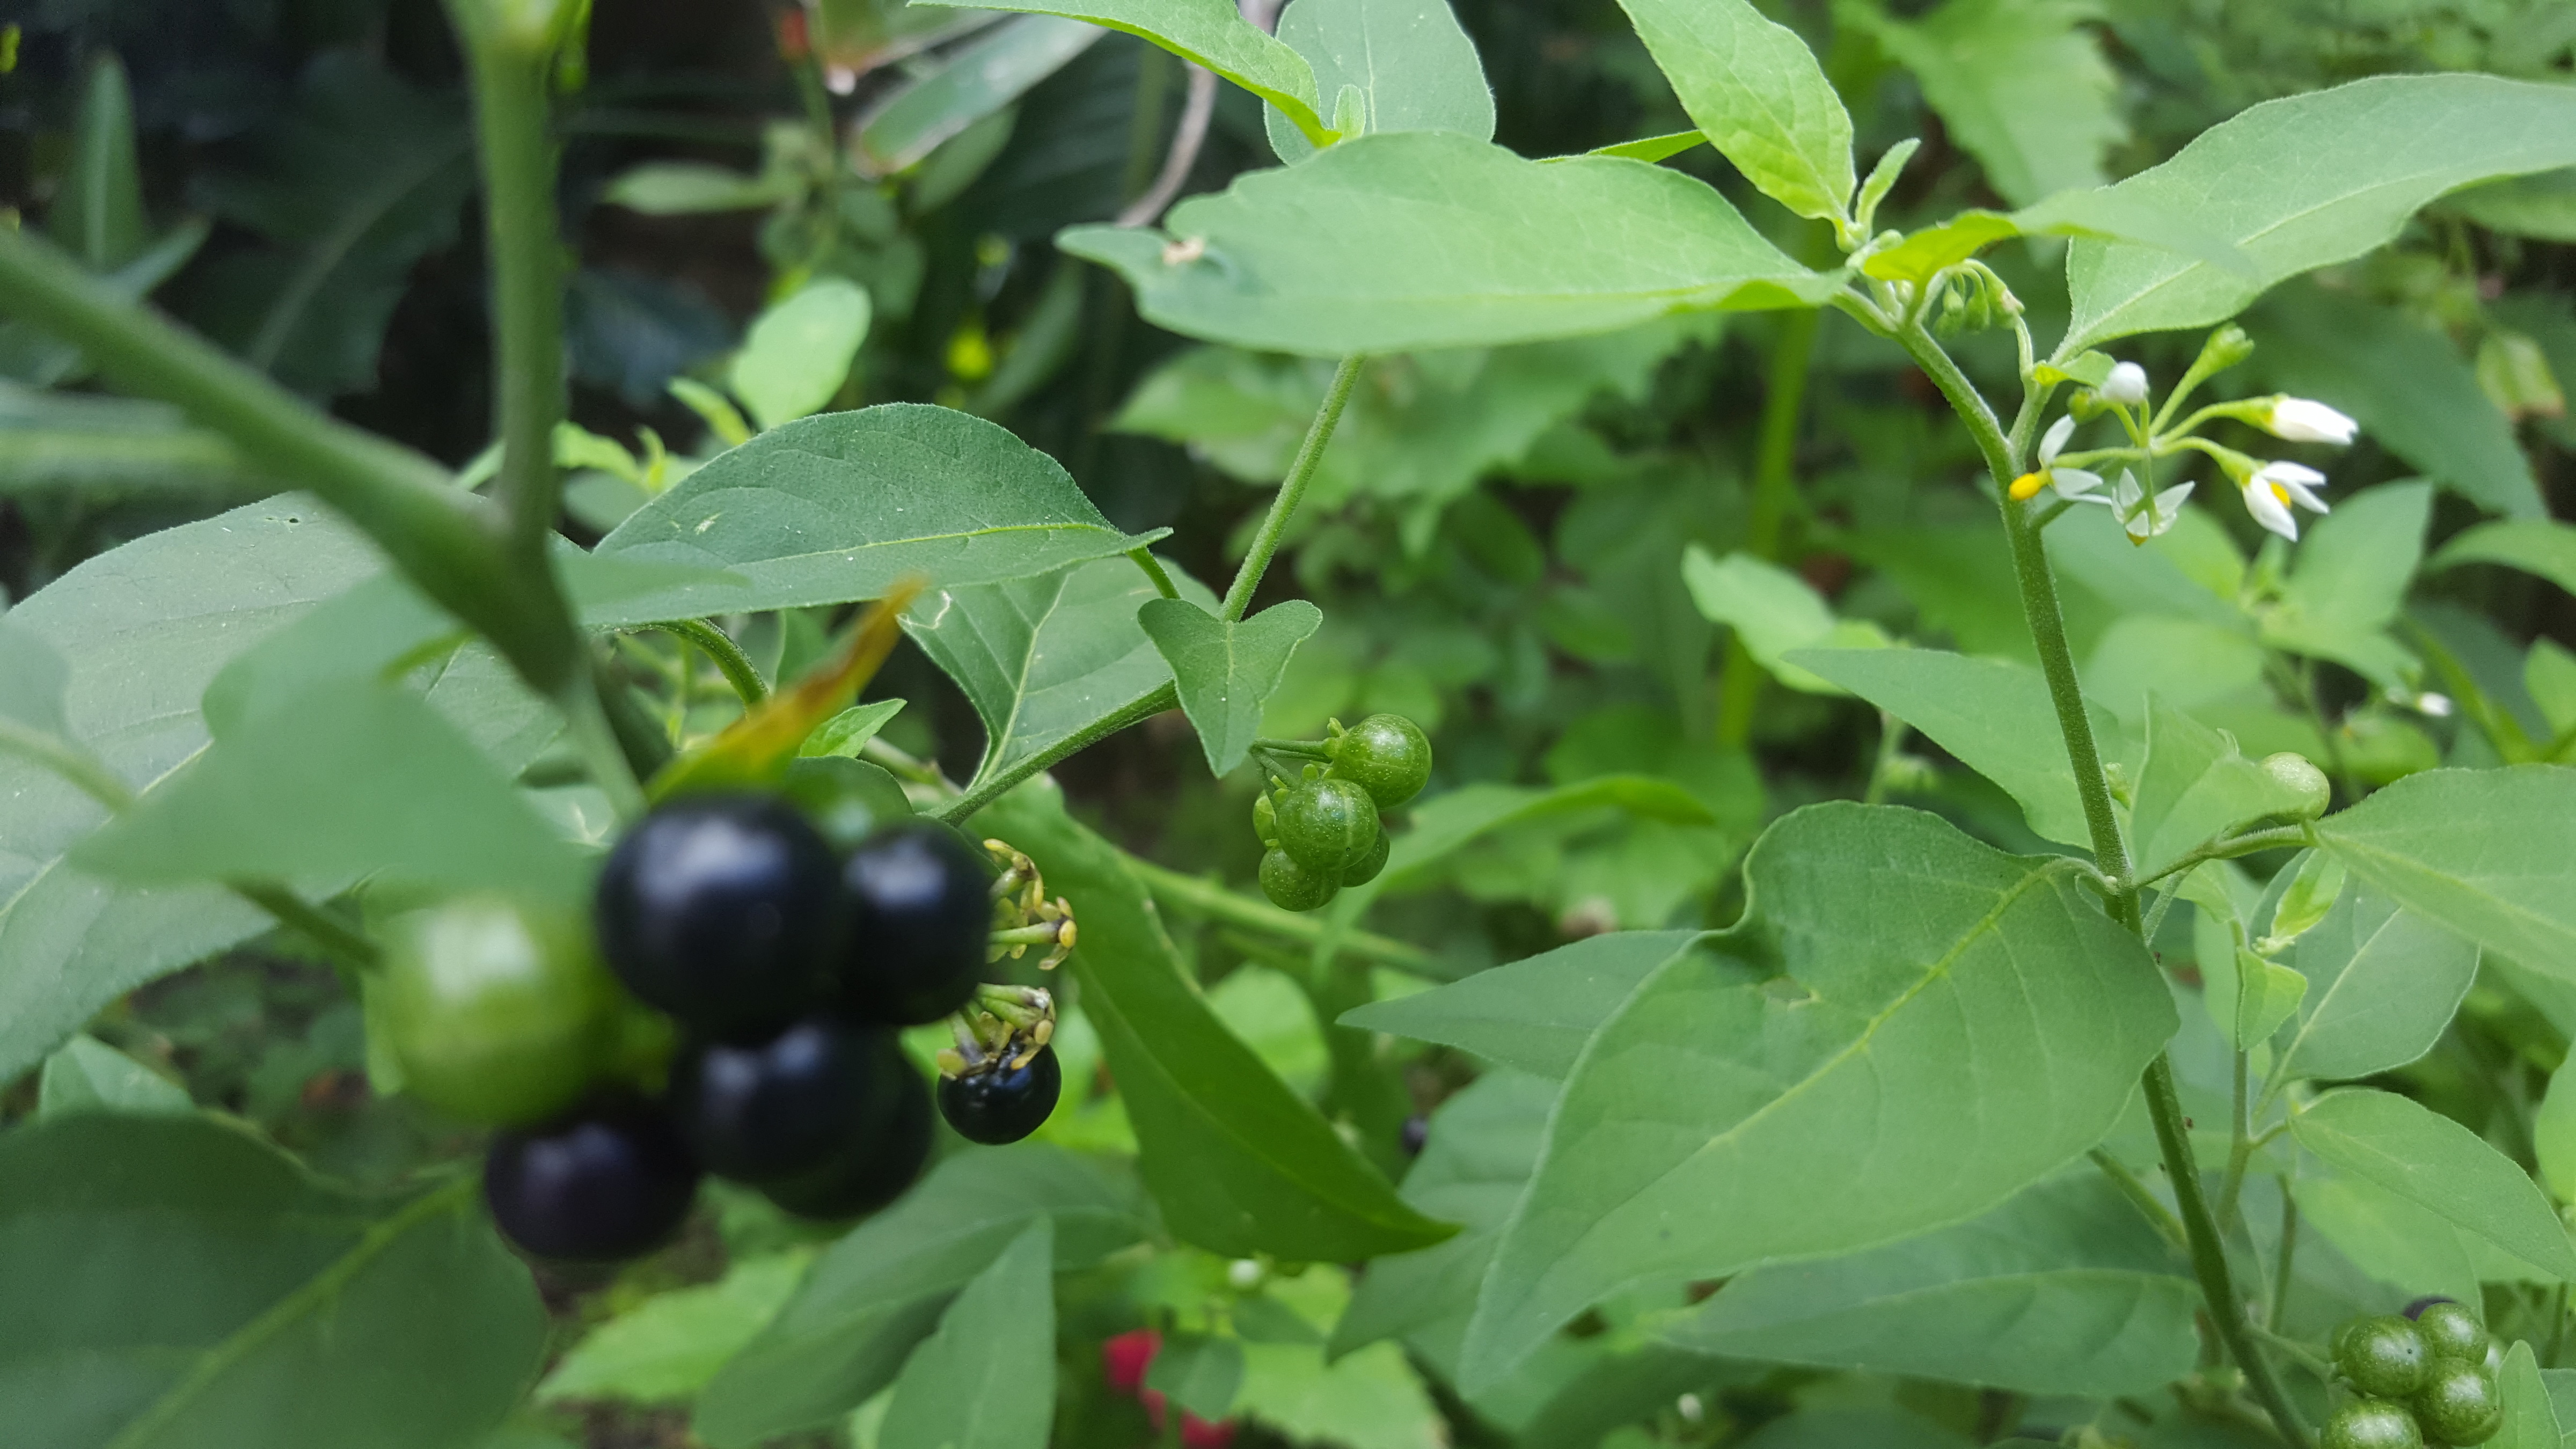 Is this nightshade? It has a tiny white flower and a black berry ...